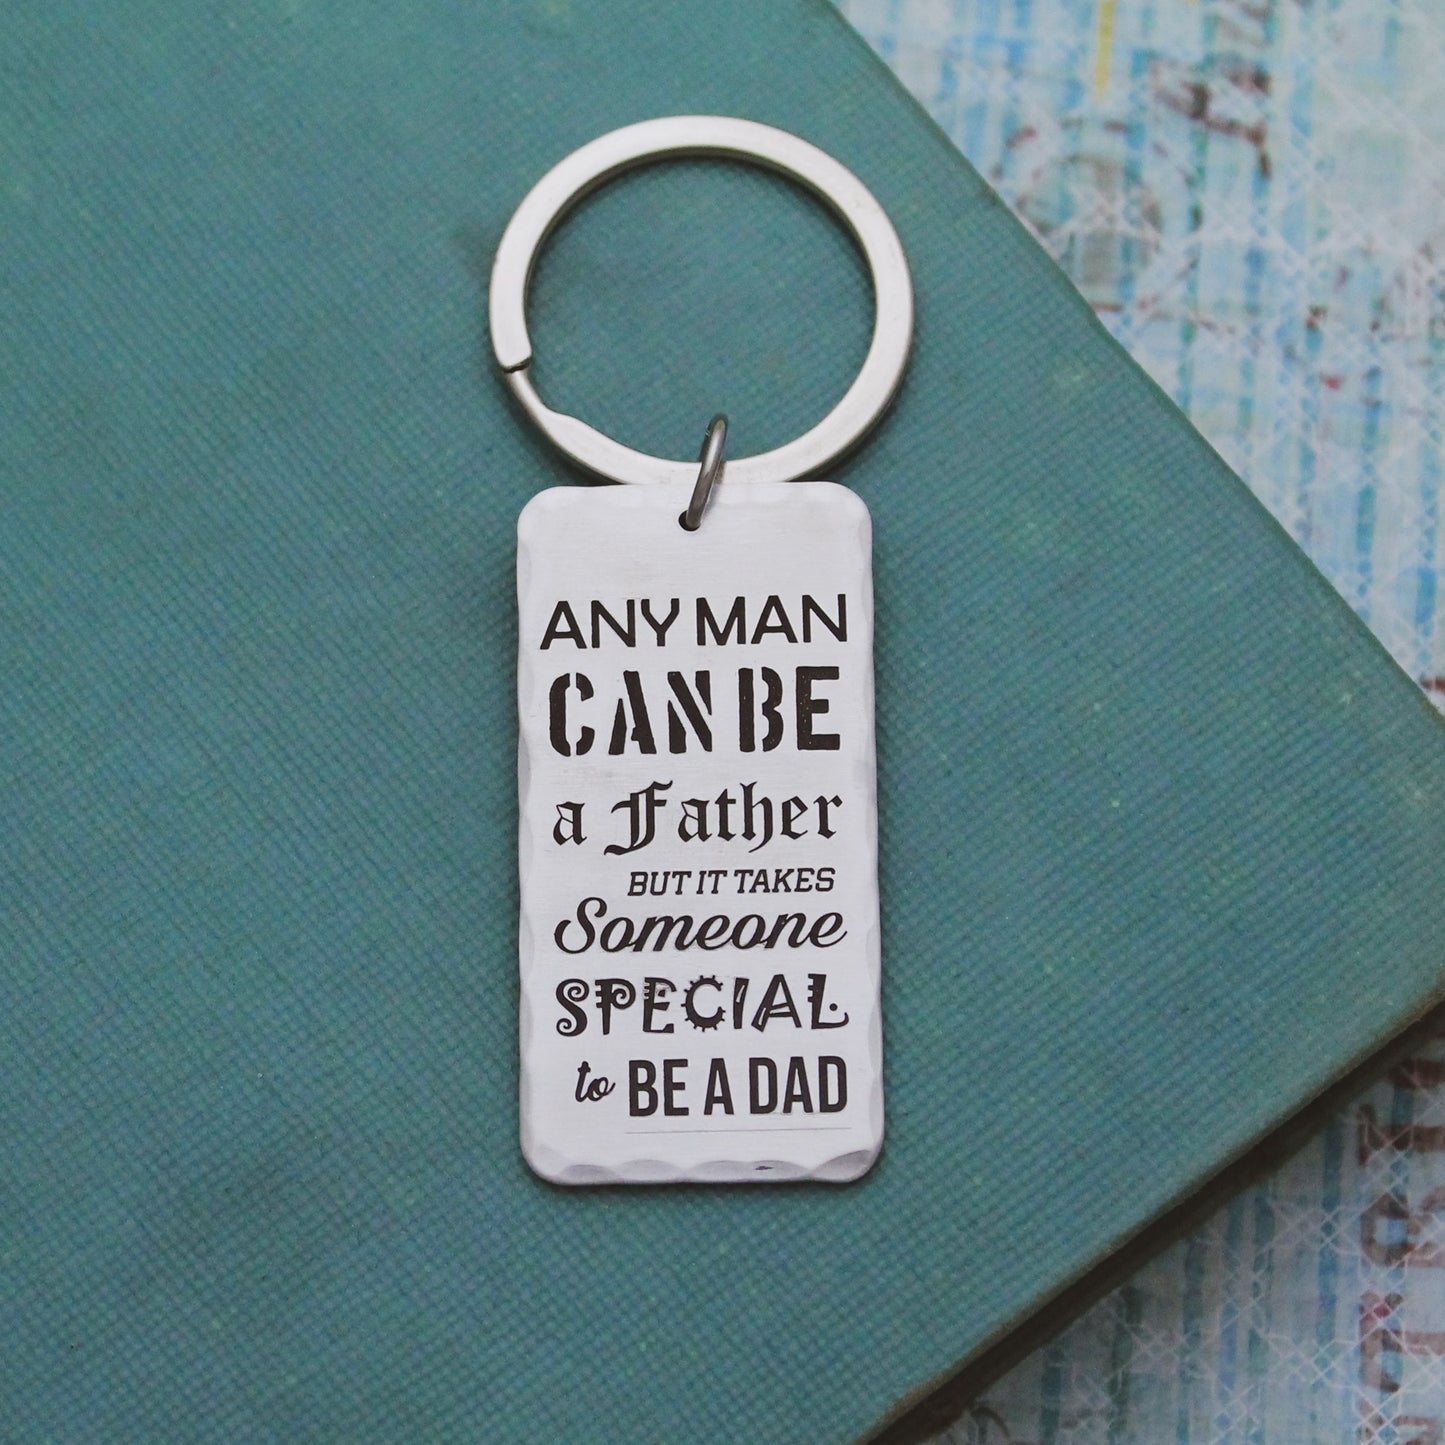 Any Man Can Be a Father But it Takes Someone Special to be a DAD Keychain, Father's Day Gift, Personalized Keychain for Dad, Gift for Dad